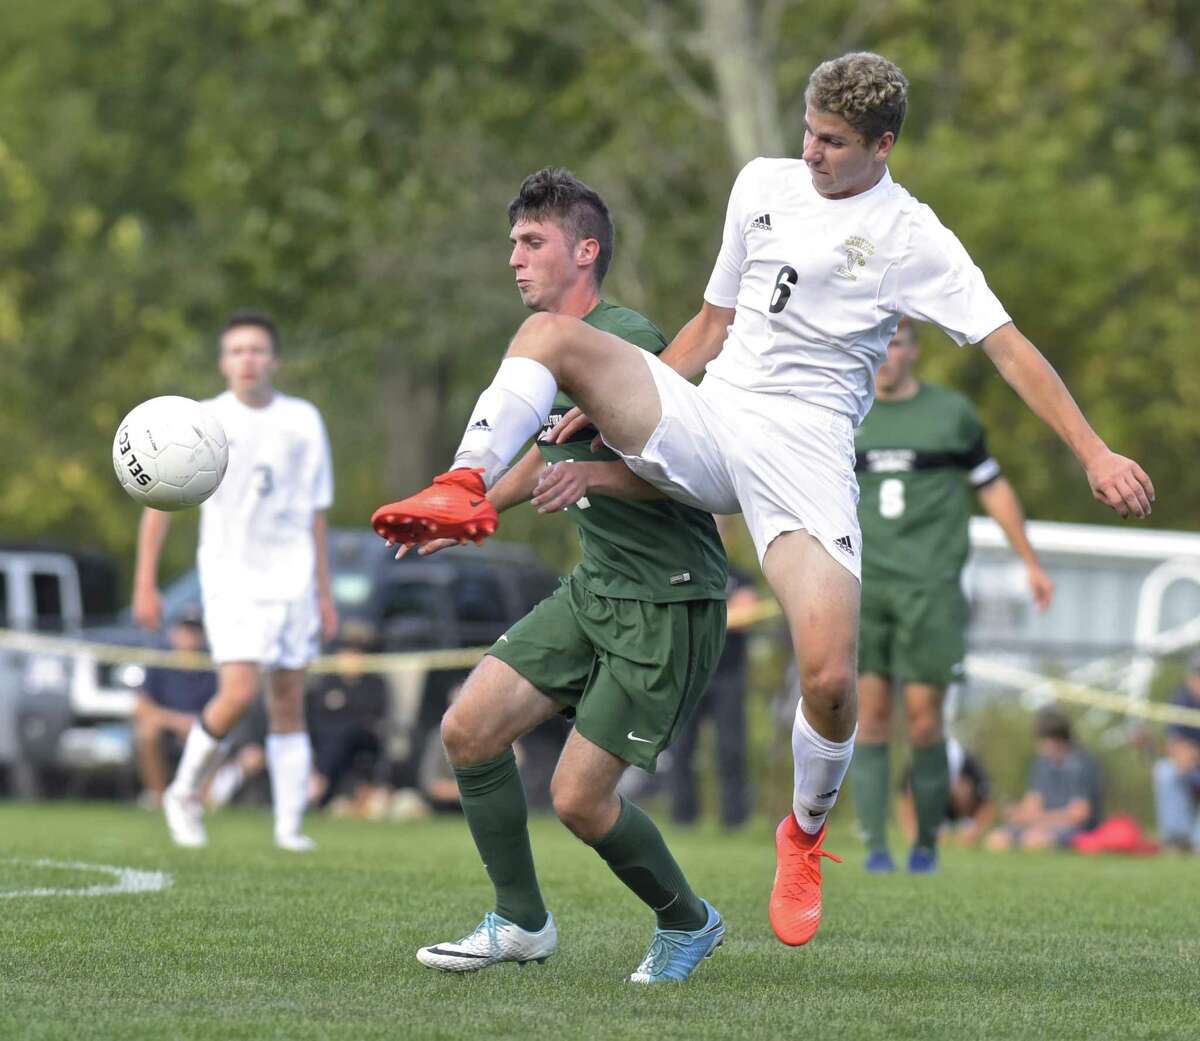 Barlow's Jack Warren (6) kicks away the ball in front of New Milford's Shane Fedigan (14) in the boys soccer game between New Milford and Joel Barlow high schools, Thursday afternoon, September 28, 2017, at Joel Barlow High School, in Redding, Conn.